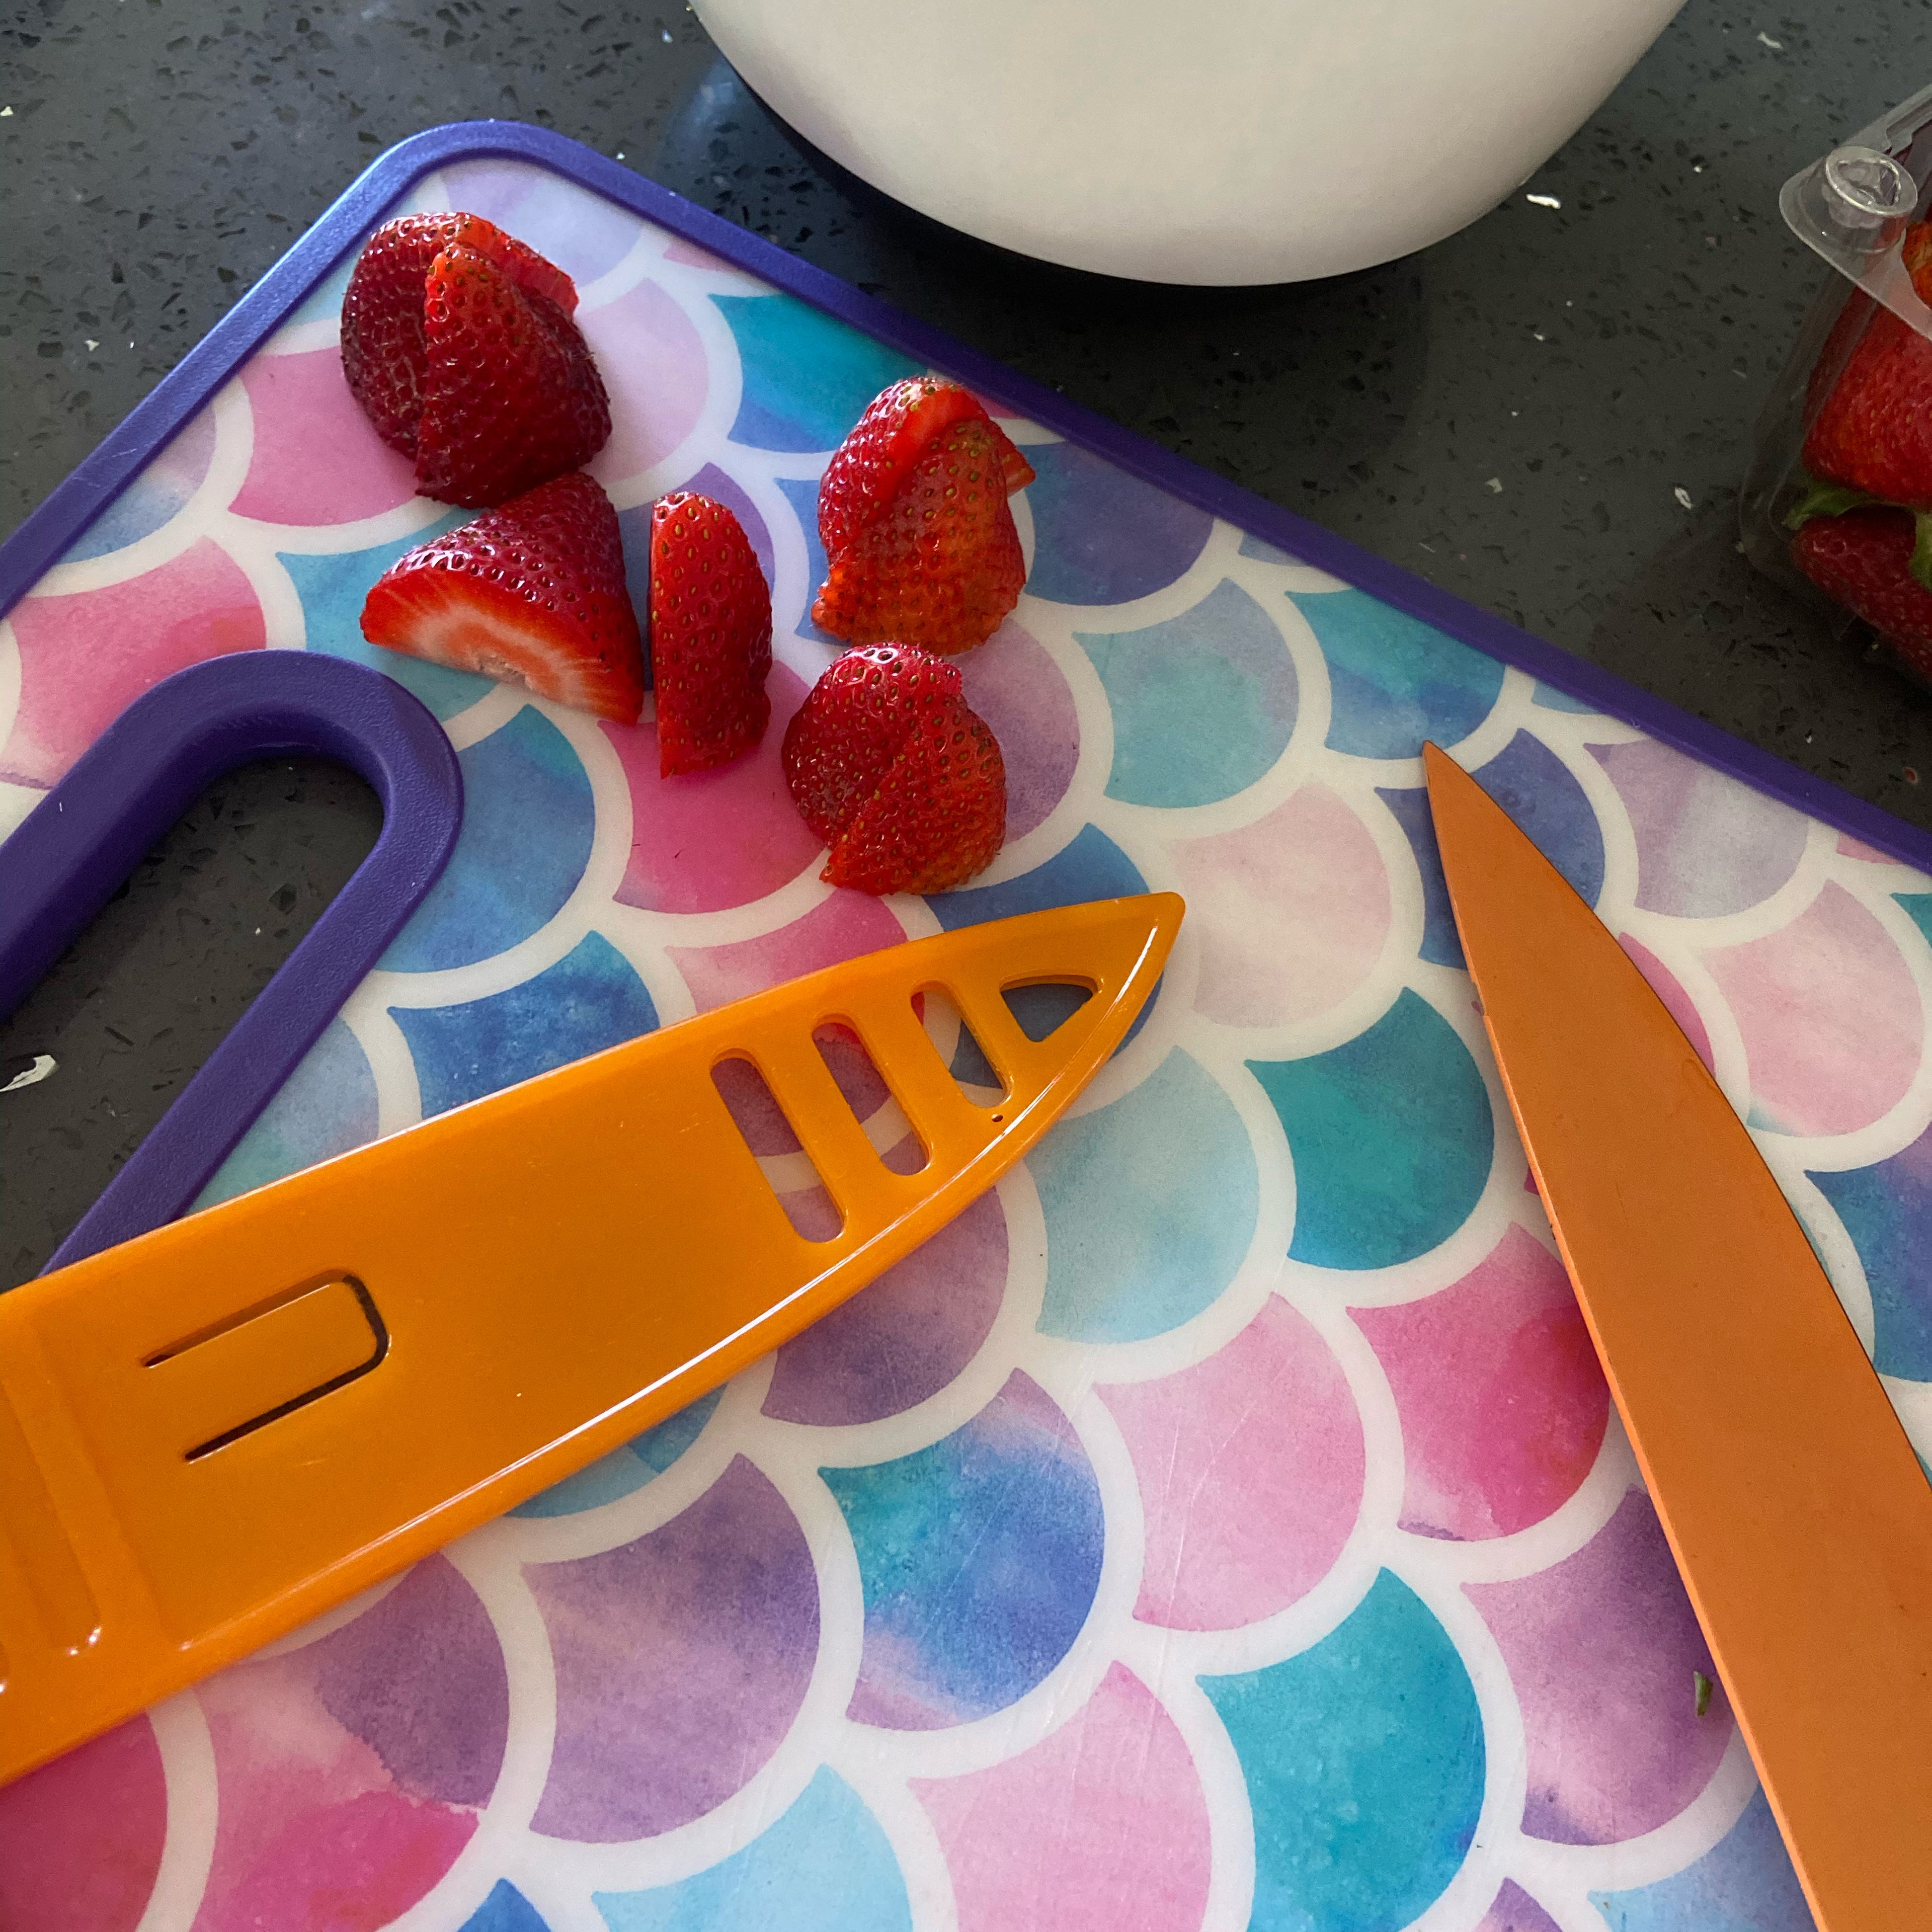 Cut up the strawberries